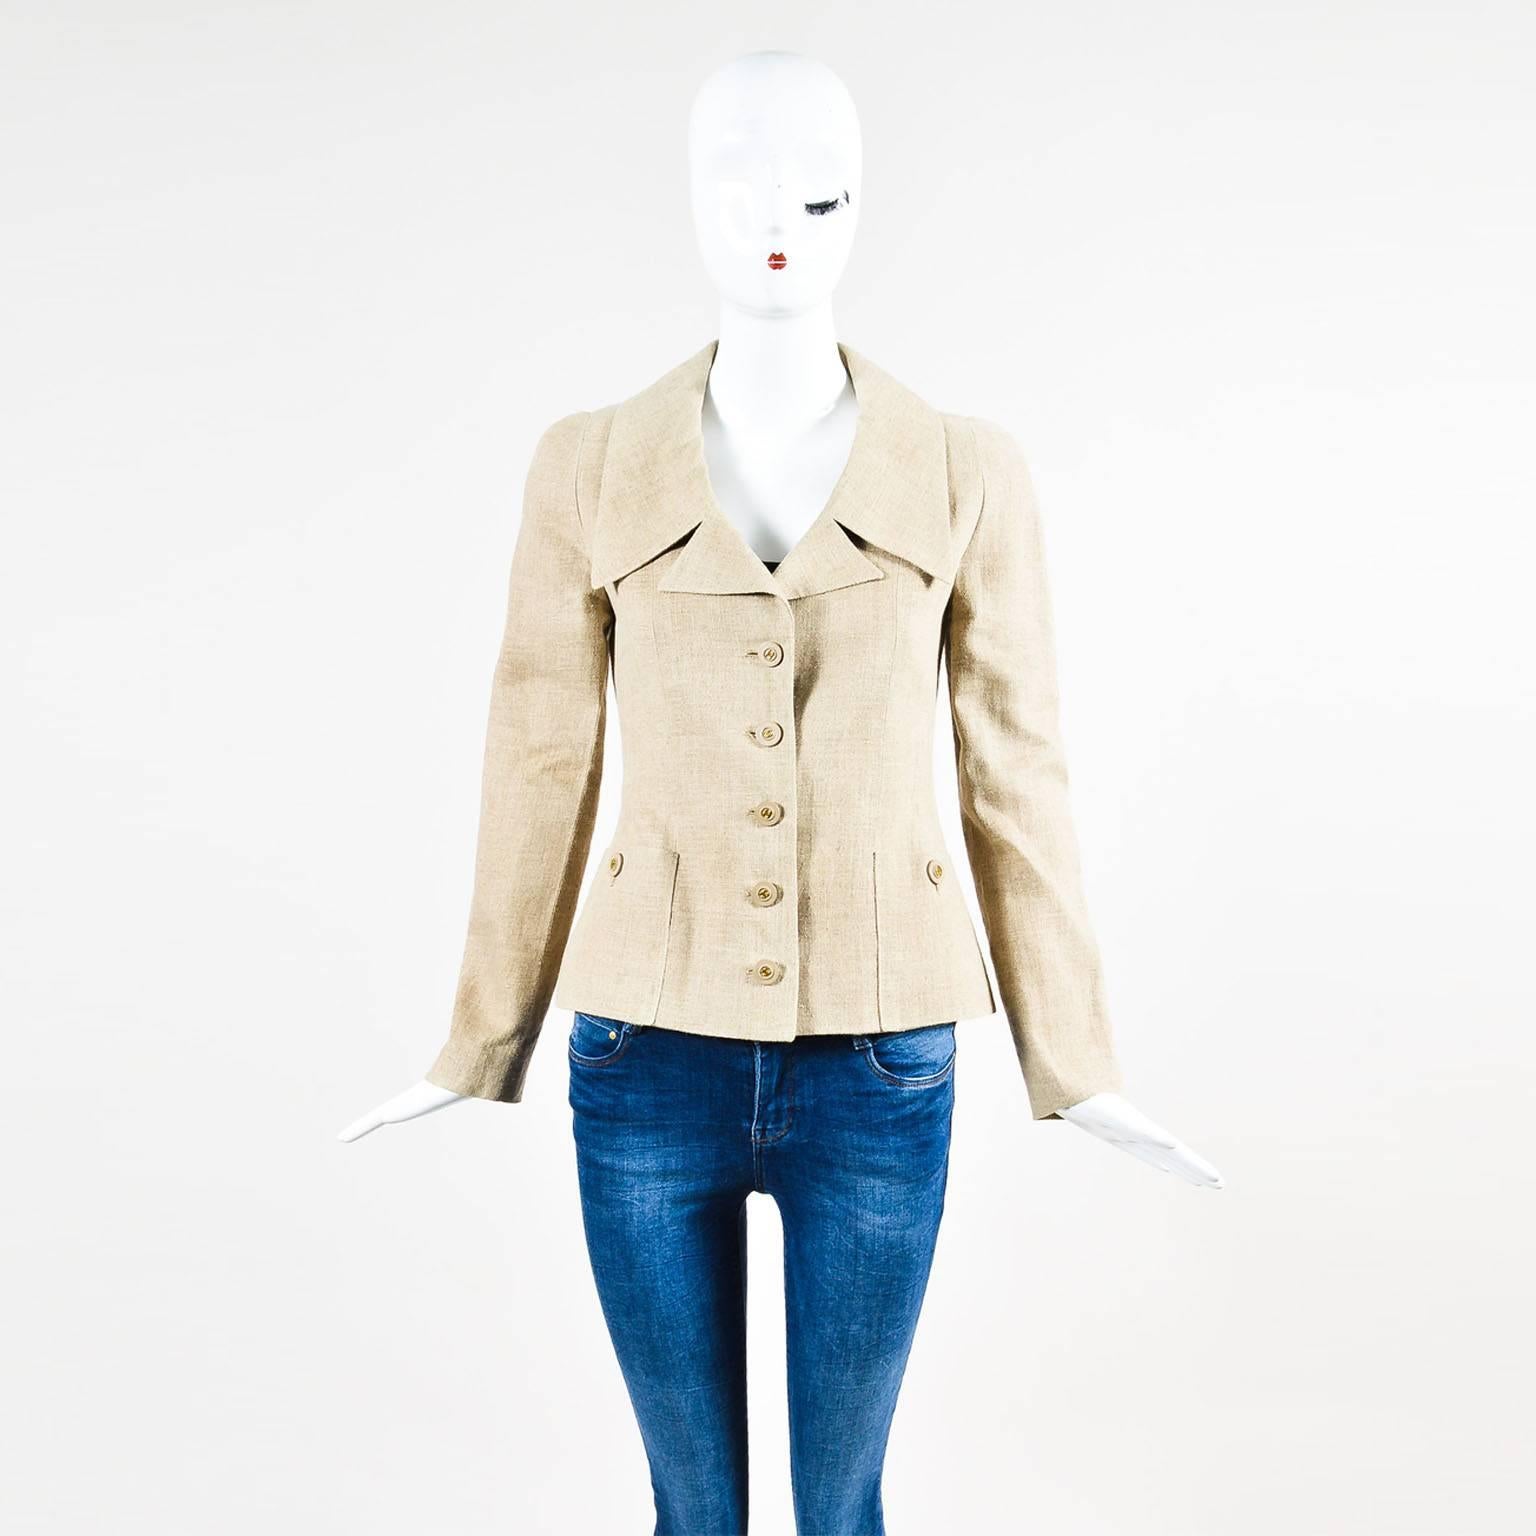 Chanel tan linen jacket has button closure down front, each detailed with a gold tone 'CC' logo. Long sleeves have padded shoulders and button closure at the openings. Two pockets. Two short slits in back. Silk lined. From the Spring 1994